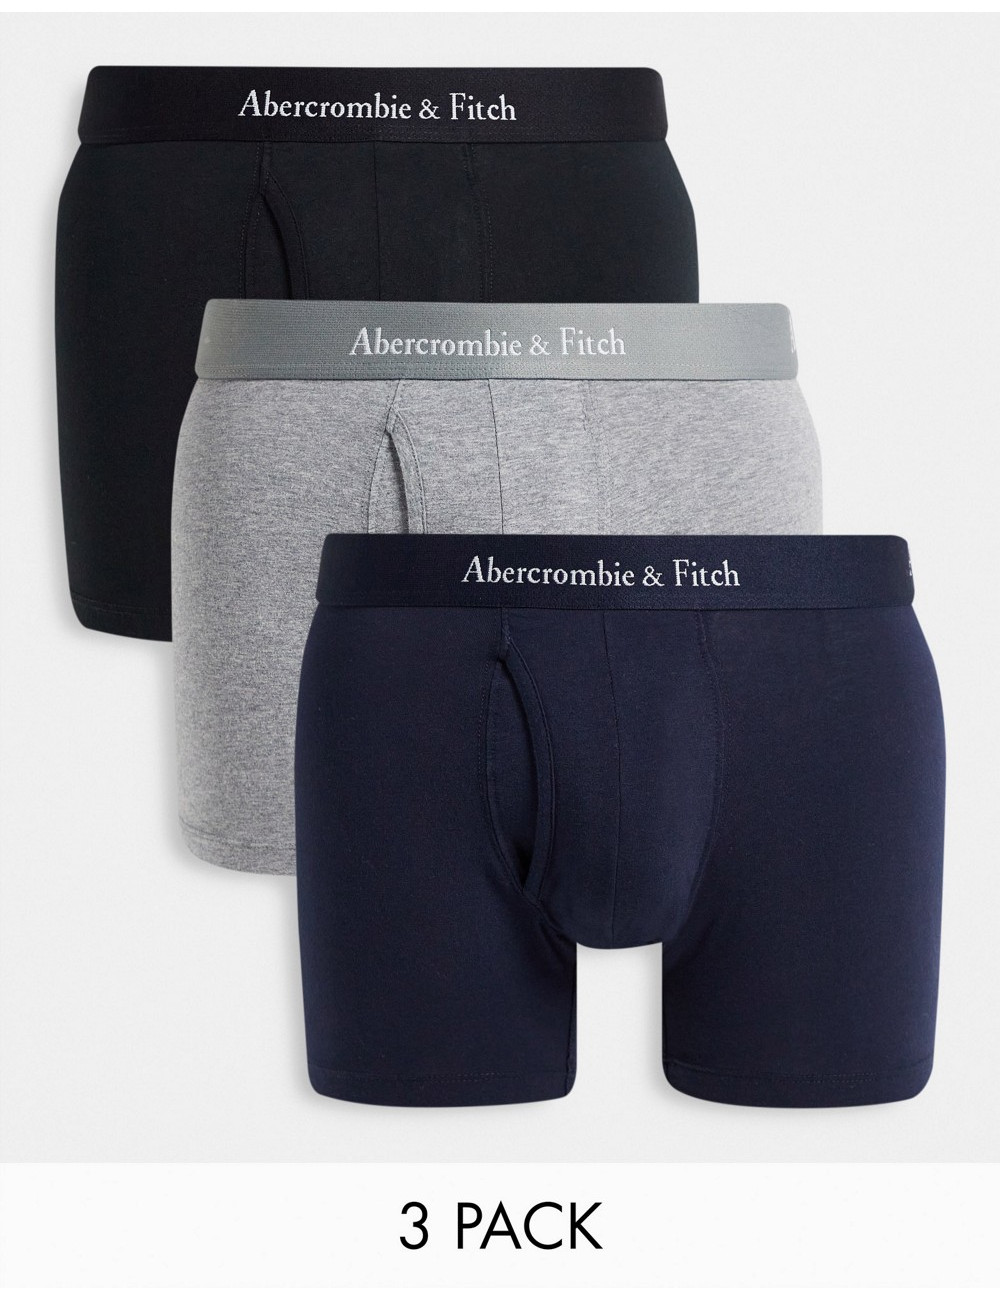 Abercrombie & Fitch 3 pack...